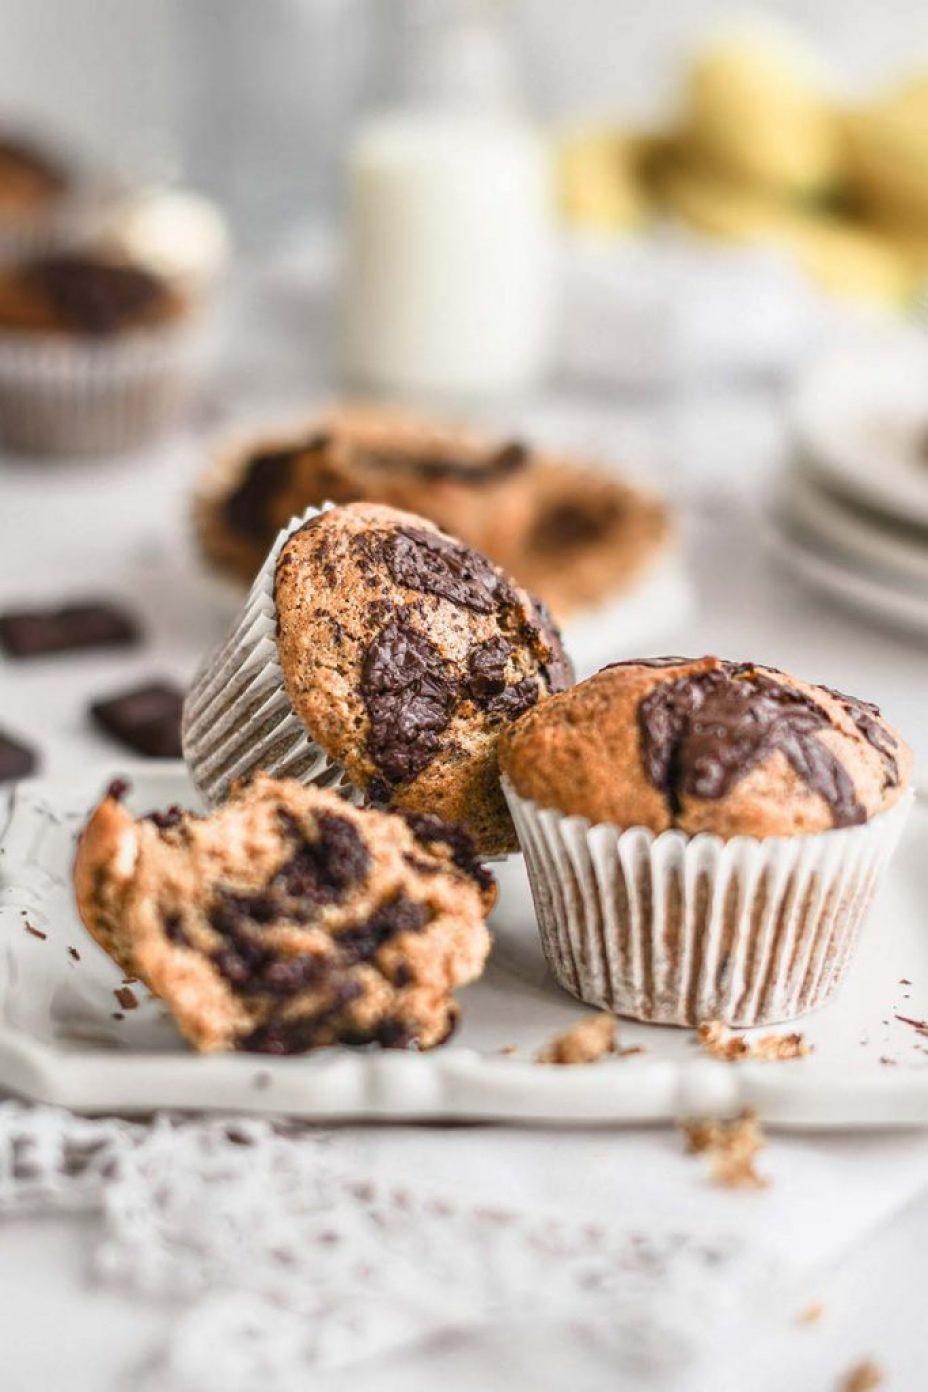 Chocolate banana bread muffins, delicious simple bakes for mid week treats